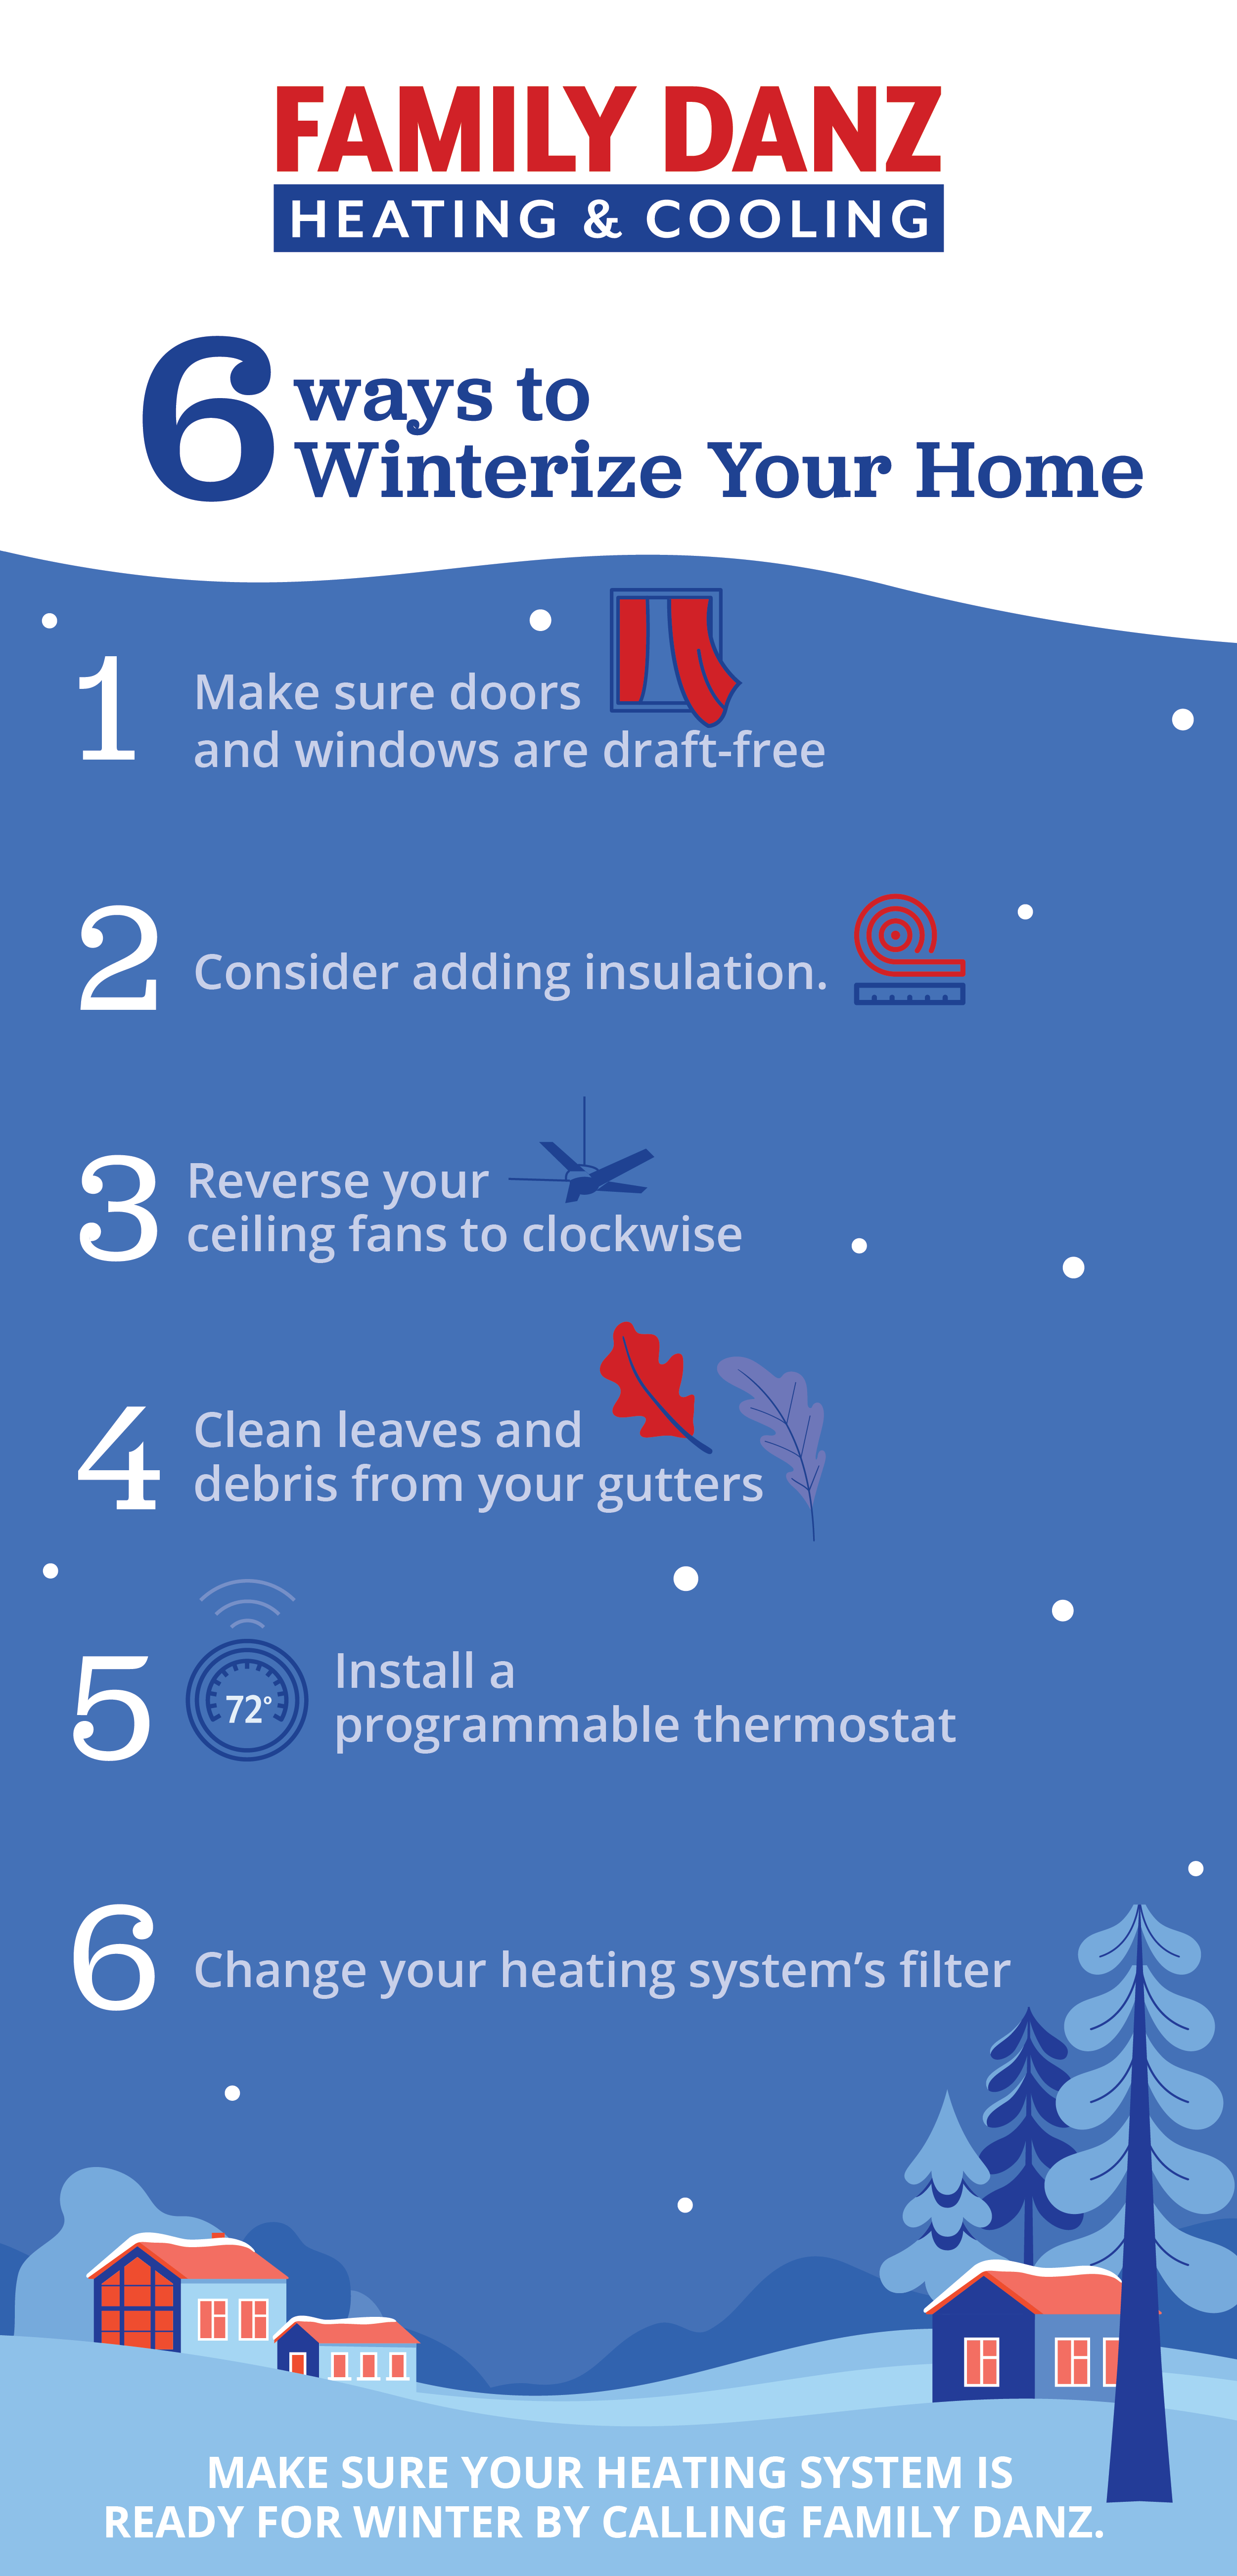 6 Ways to Winterize Your Home Infographic.